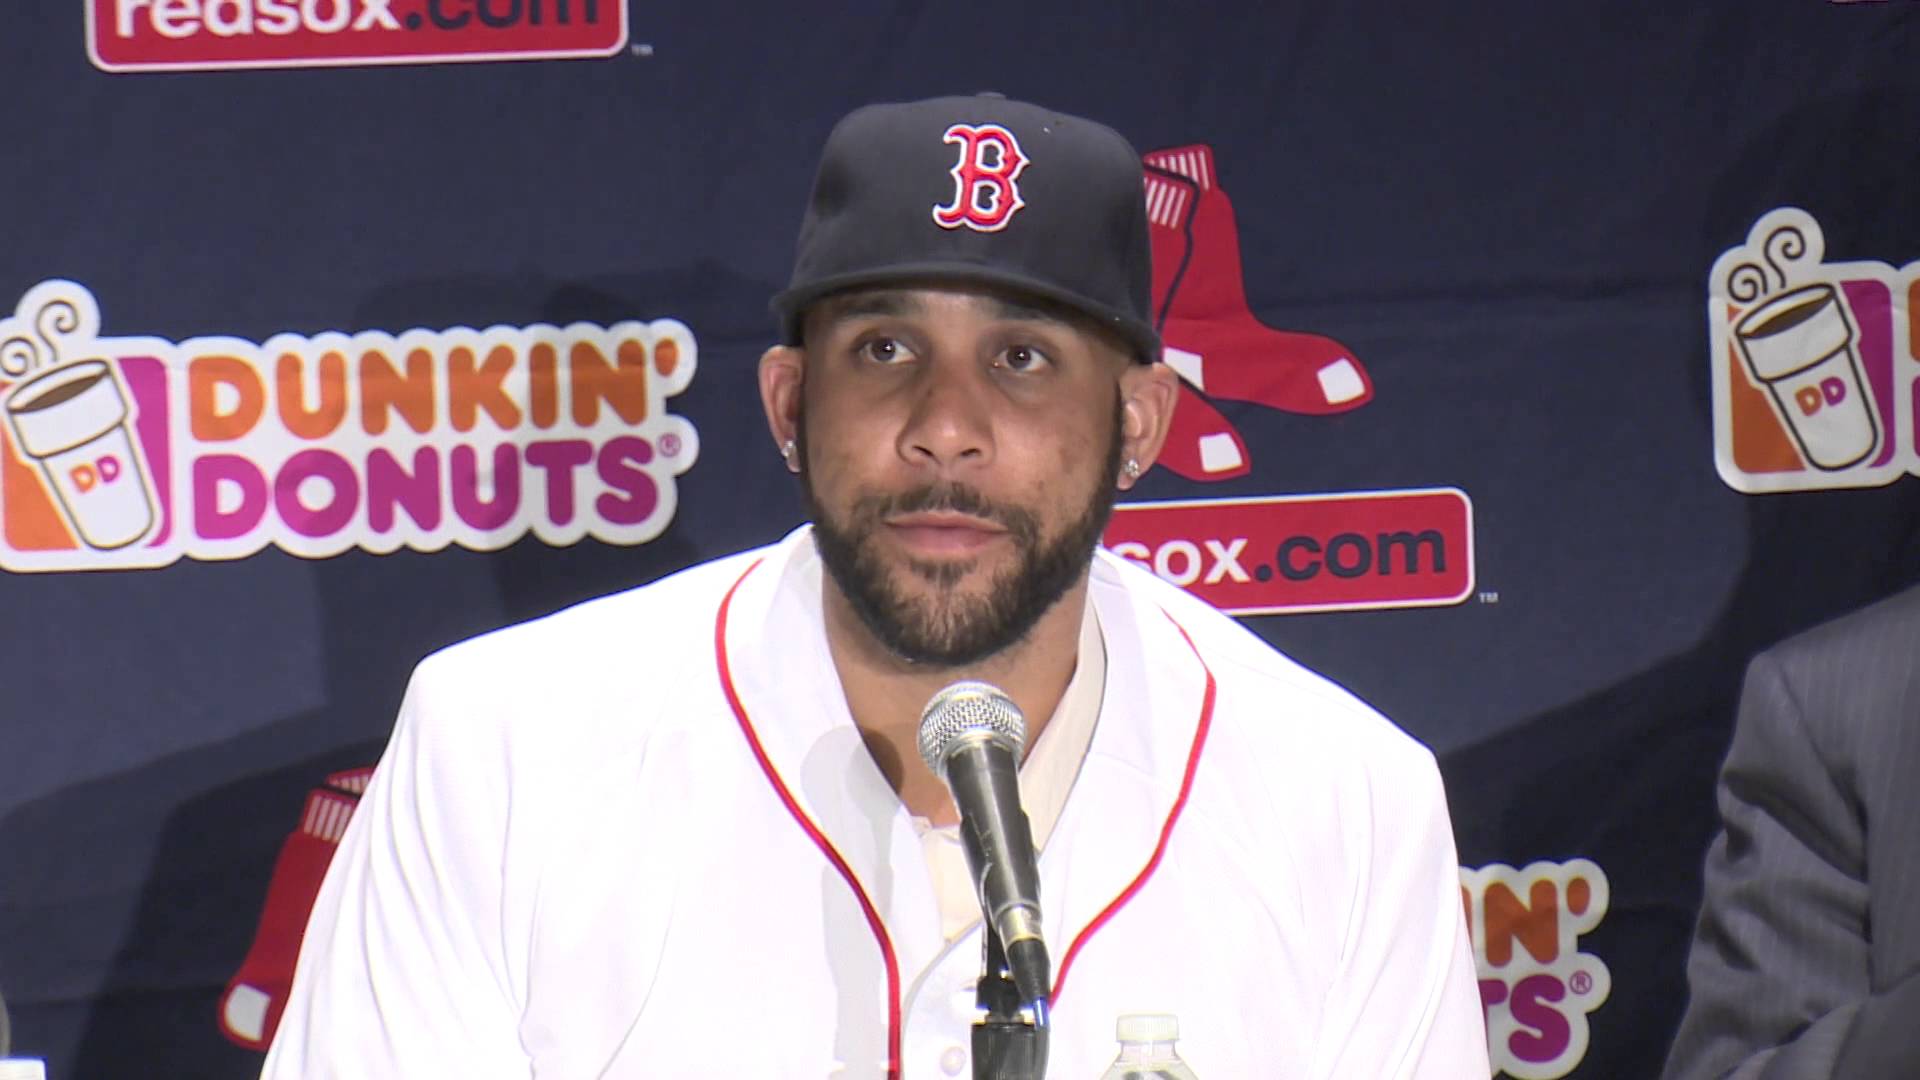 David Price introduced by the Boston Red Sox (Full Press Conference)